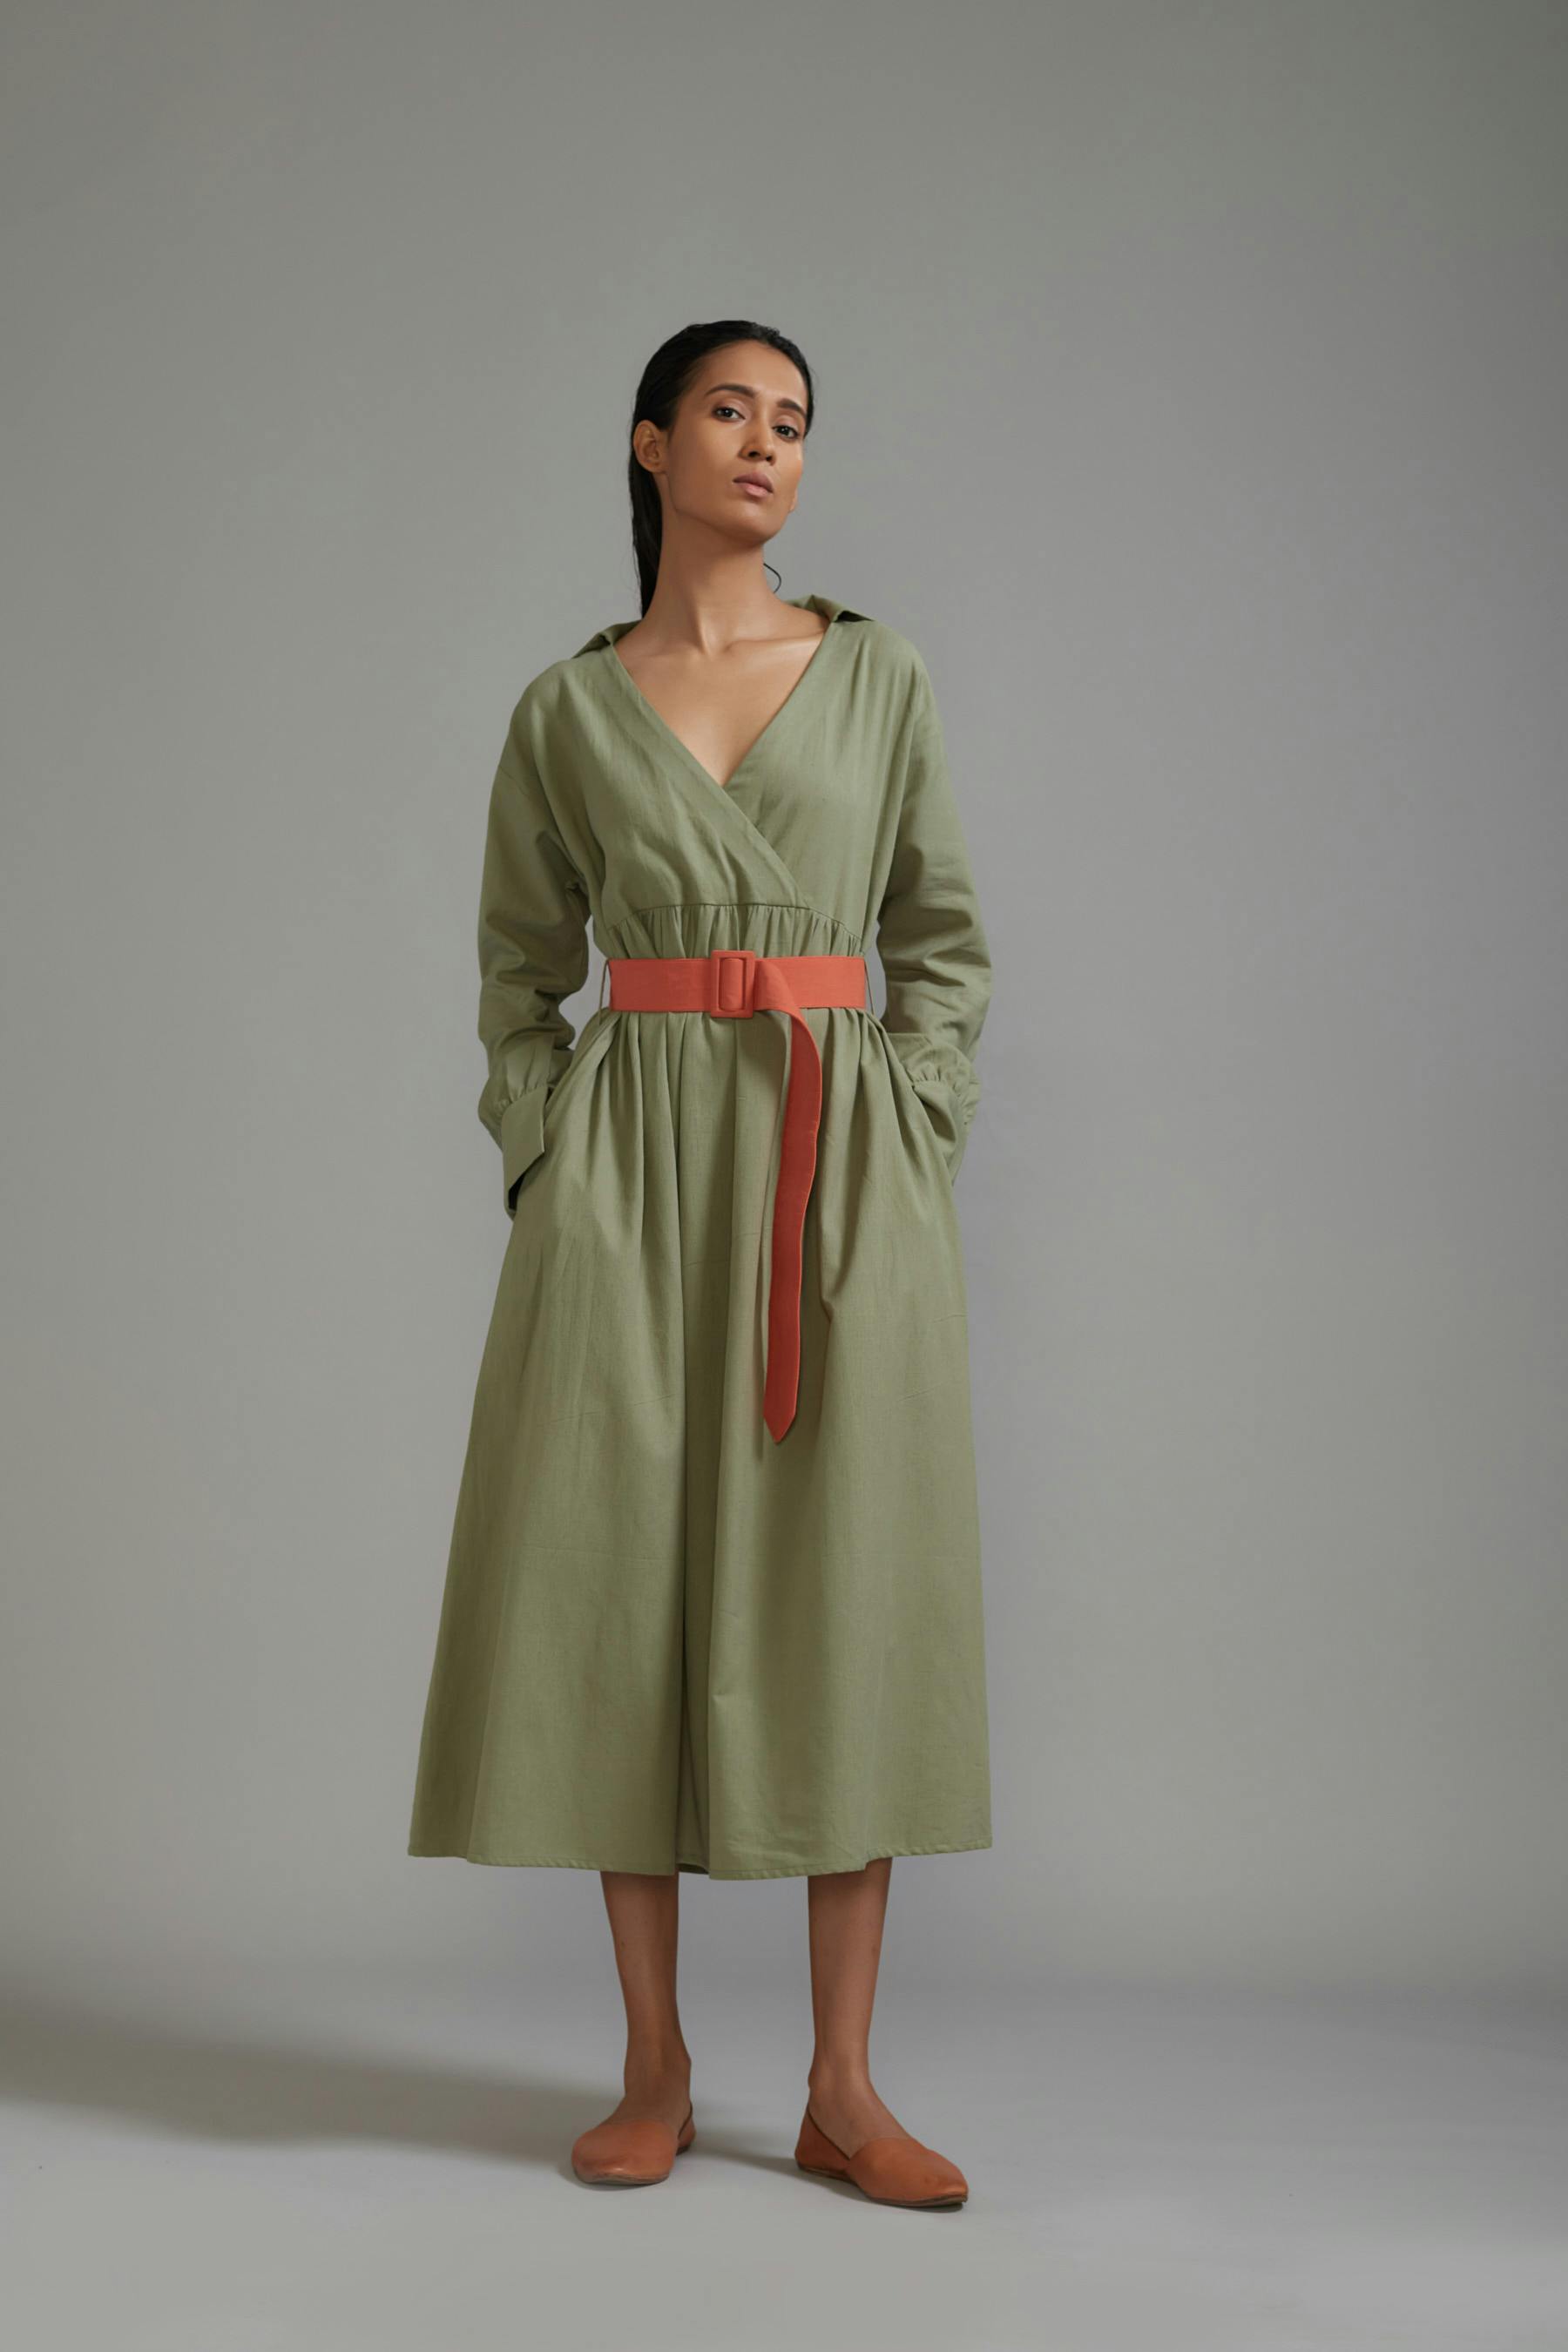 Green Safari Belted Dress, a product by Style Mati